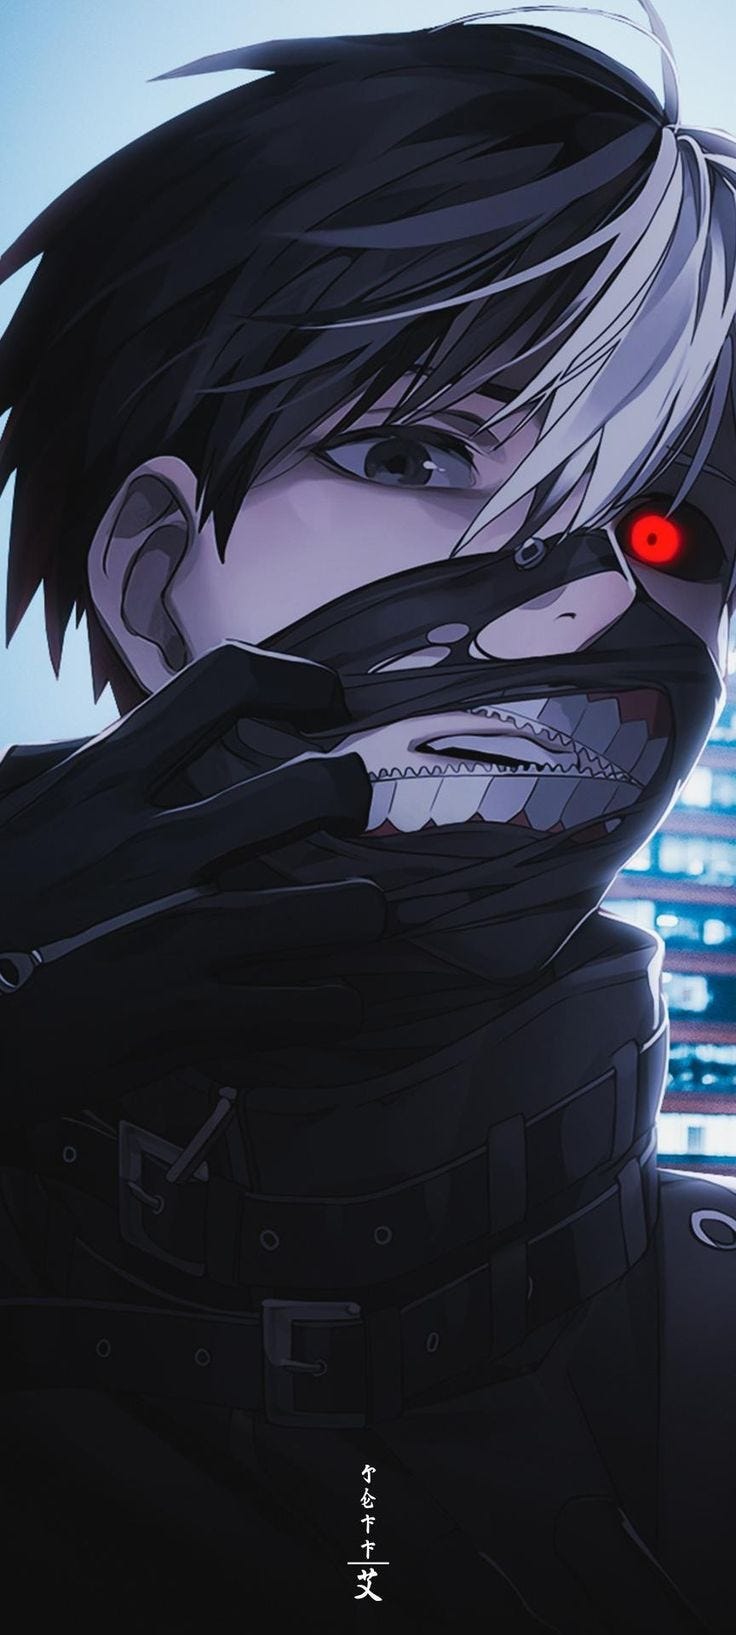 Here are 3 reasons why you should Read Tokyo Ghoul Manga instead